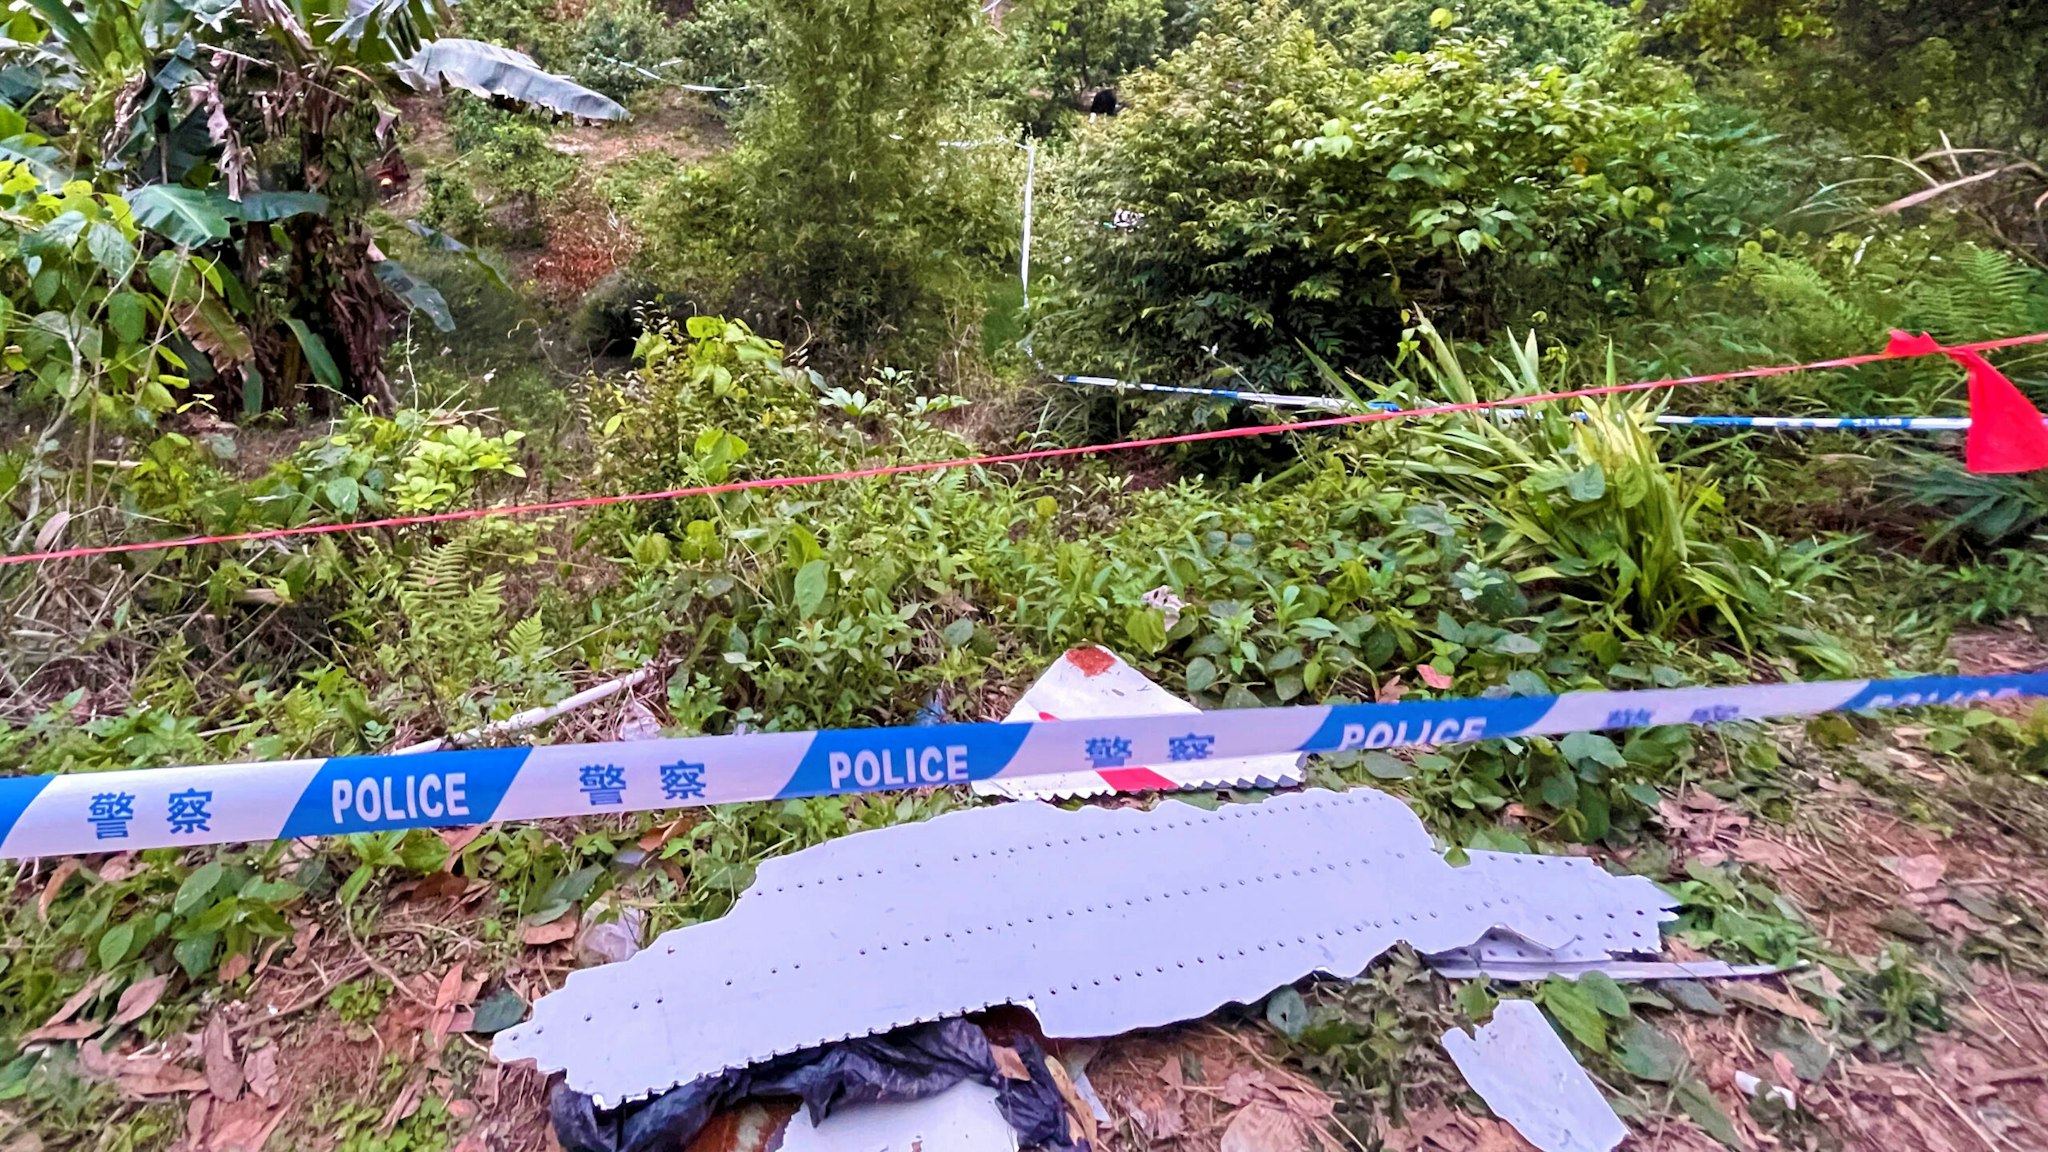 Photo taken with a mobile phone shows pieces of a crashed passenger plane's wreckage found at the crash site in Tengxian County, south China's Guangxi Zhuang Autonomous Region, March 22, 2022. A passenger plane with 132 people aboard crashed in south China's Guangxi Zhuang Autonomous Region on Monday afternoon, the regional emergency management department said. The China Eastern Airlines Boeing 737 aircraft, which departed from Kunming and was bound for Guangzhou, crashed into a mountainous area near the Molang village in Tengxian County in the city of Wuzhou at 2:38 p.m., causing a mountain fire, according to the department. The airline said the cause of the accident will be fully investigated.